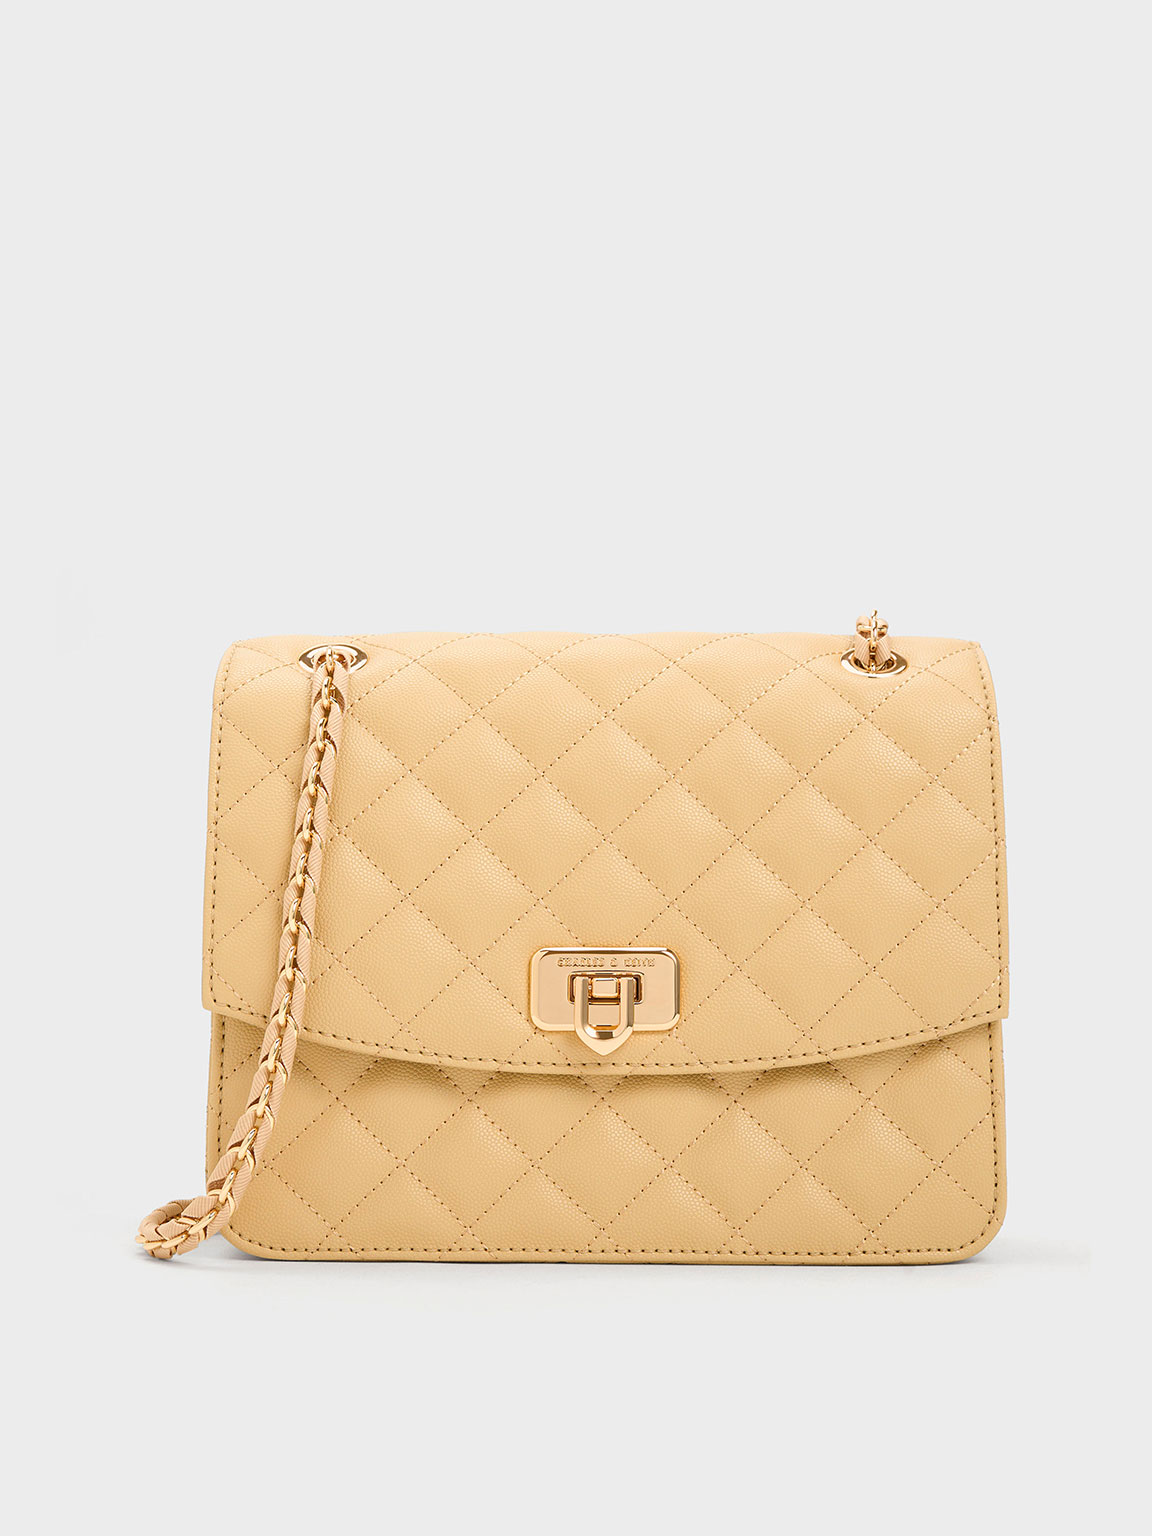 Charles & Keith - Women's Cressida Quilted Chain Strap Bag, Beige, M